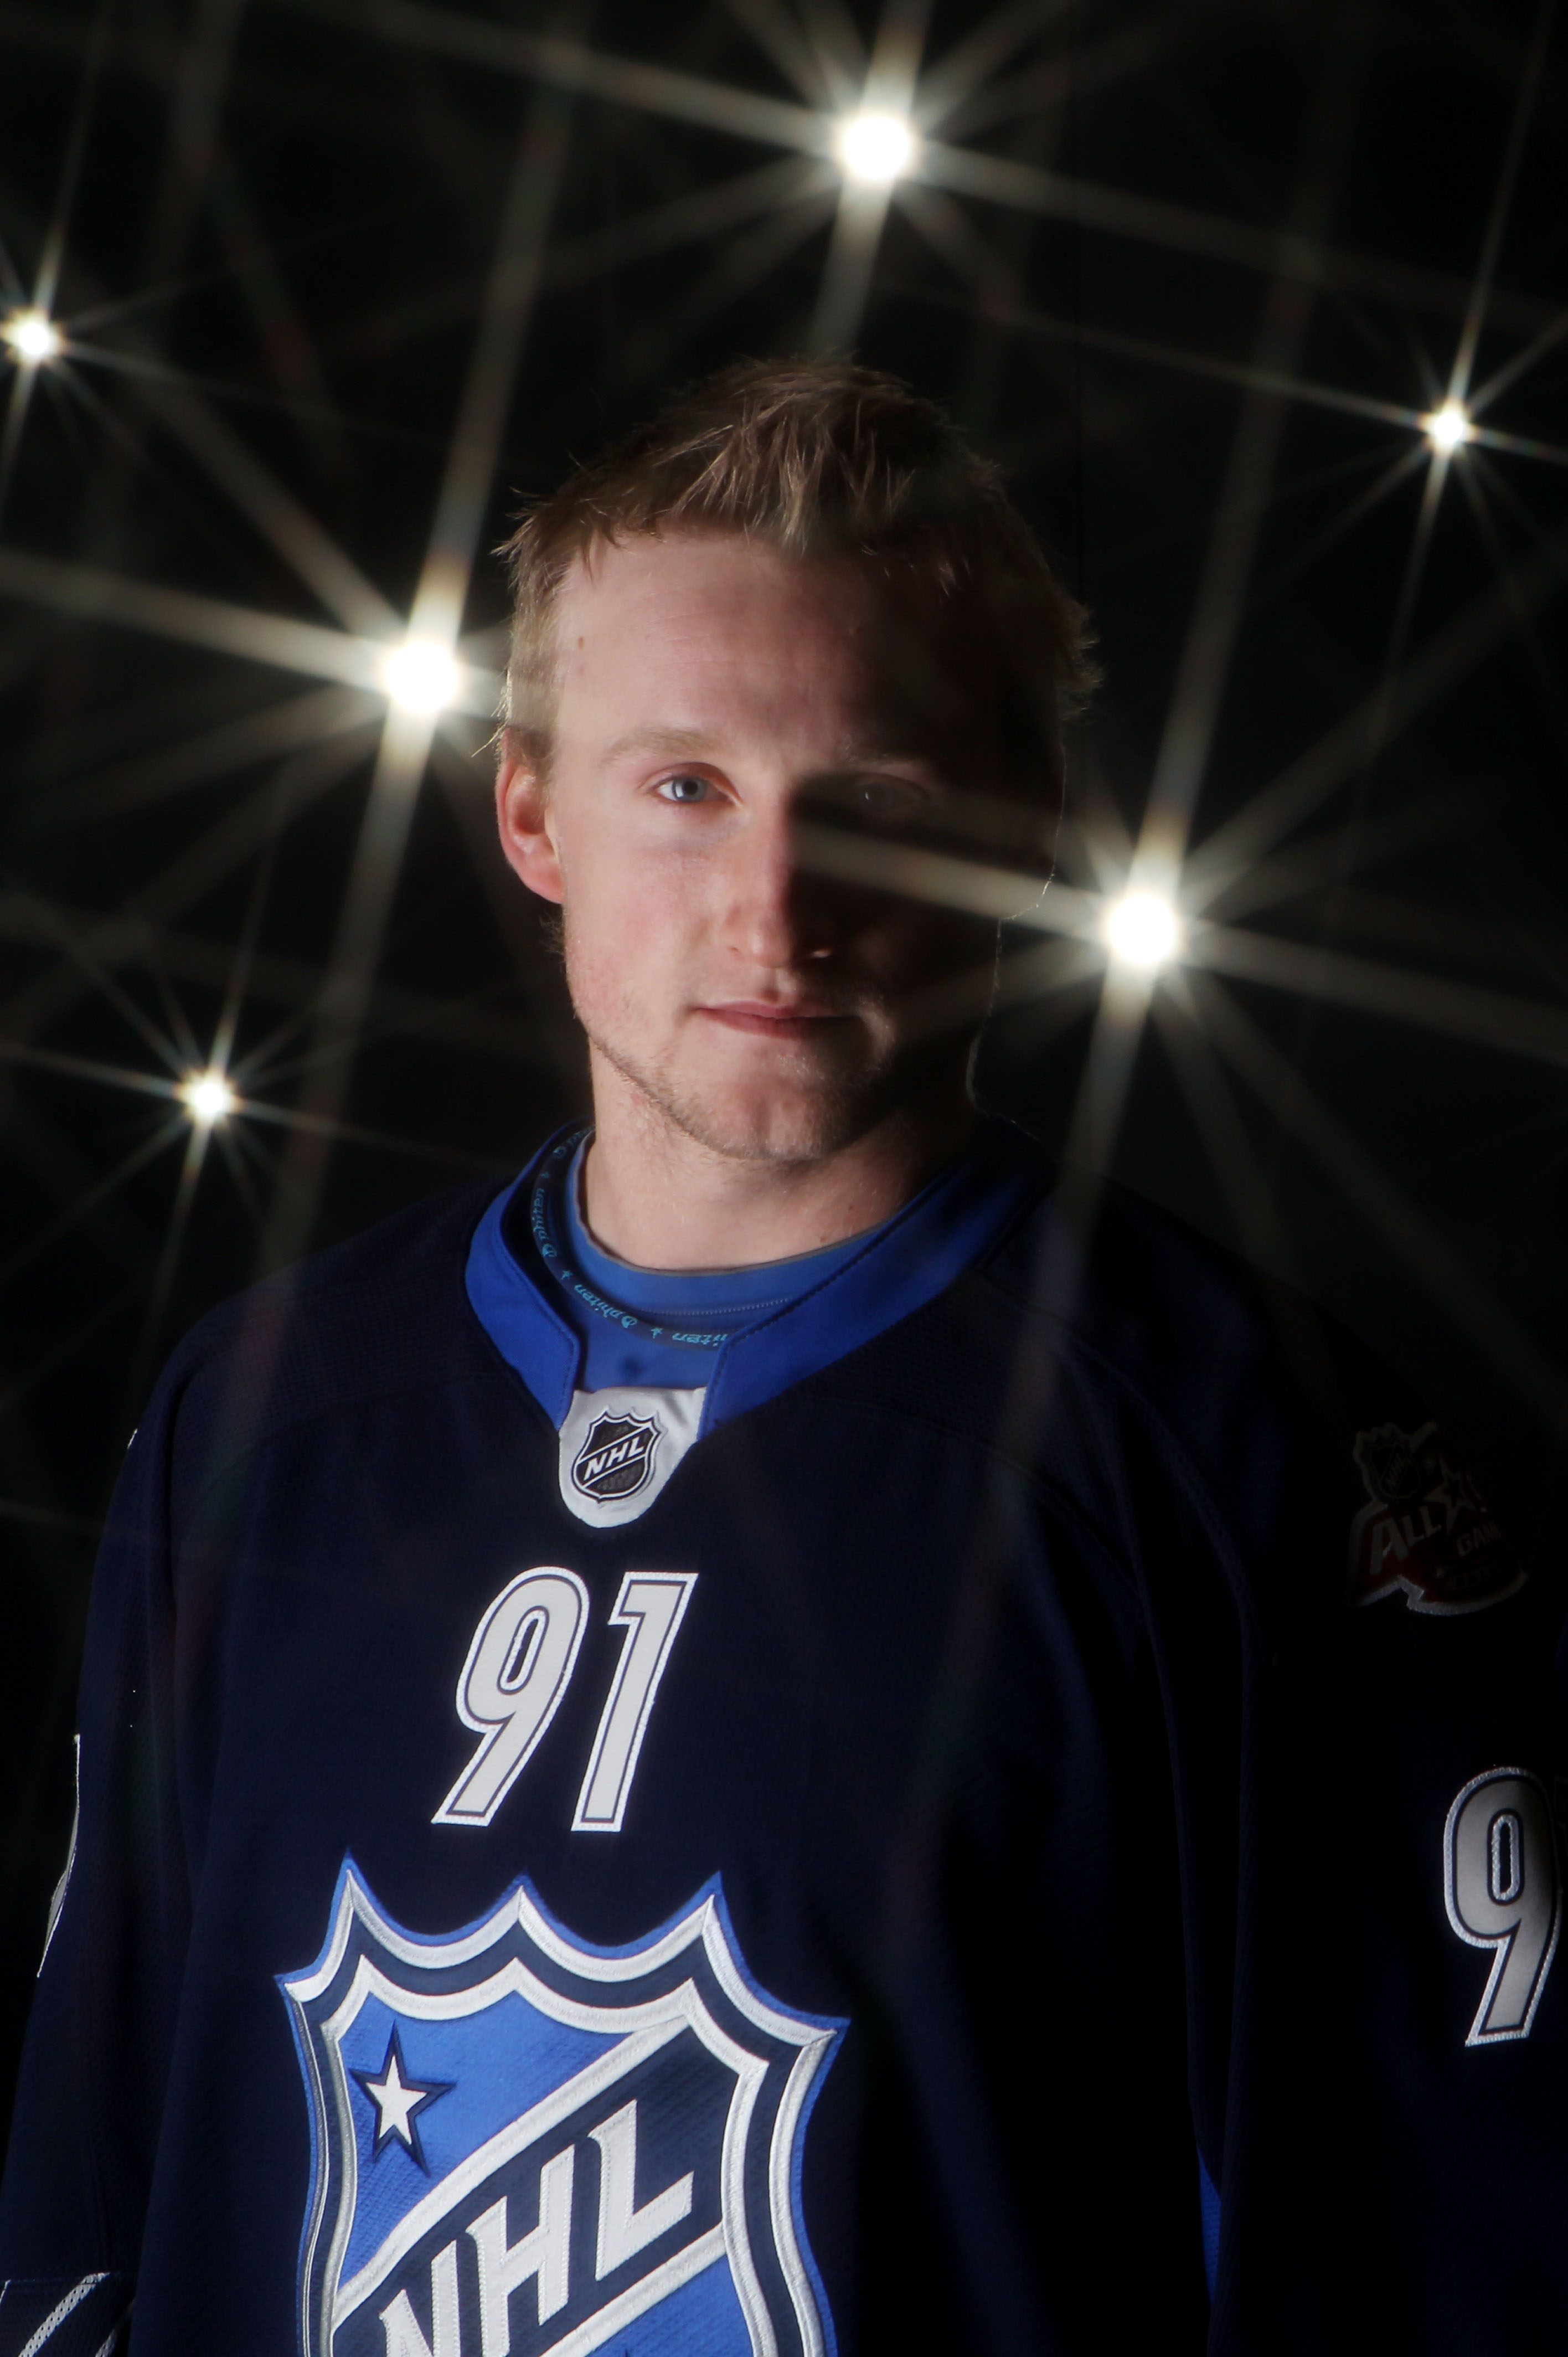 RALEIGH, NC - JANUARY 30:  Steven Stamkos #91 of the Tampa Bay Lightning poses for a portrait before the 58th NHL All-Star Game at RBC Center on January 30, 2011 in Raleigh, North Carolina.  (Photo by Bruce Bennett/Getty Images)